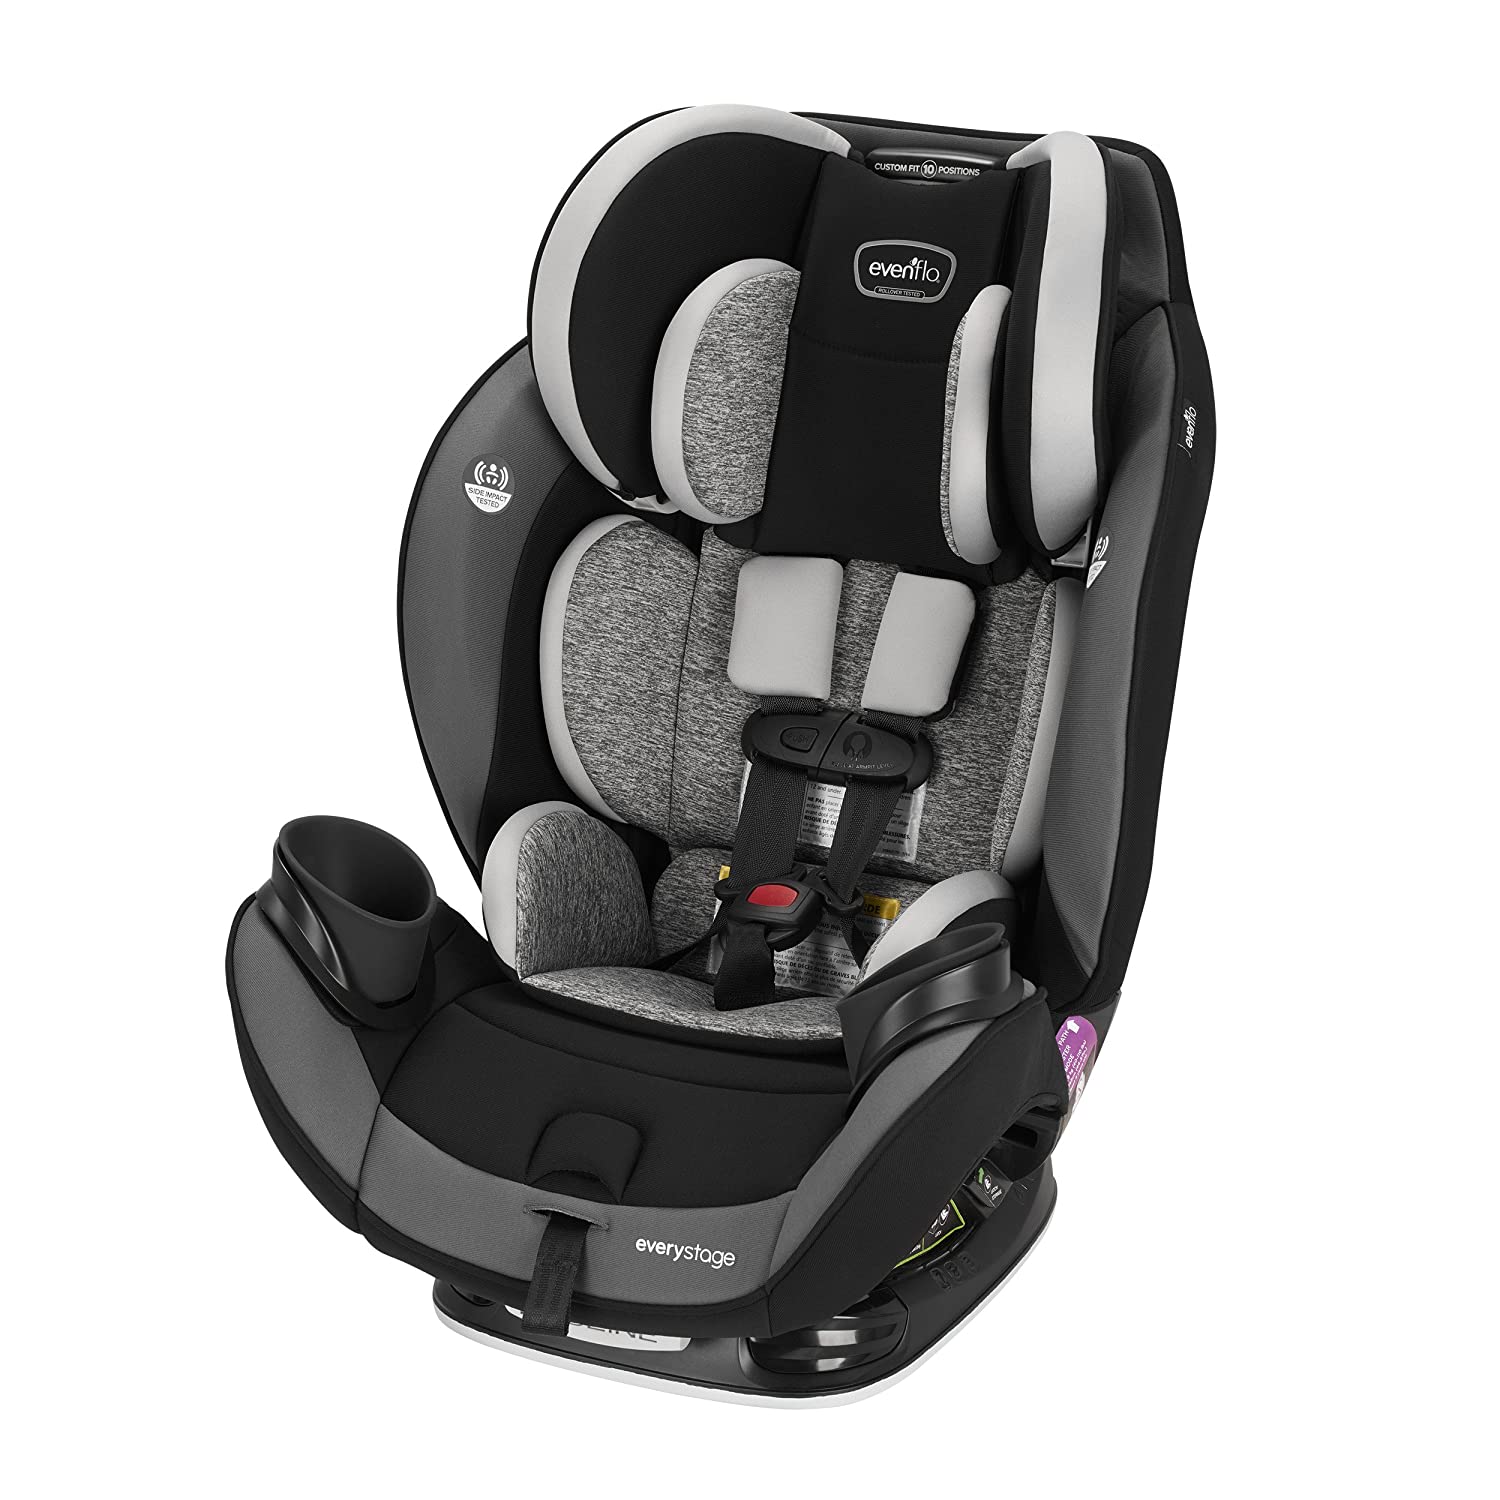 Best Car Seat For 2 Year Old Toddlers [2021 Safety Guide]